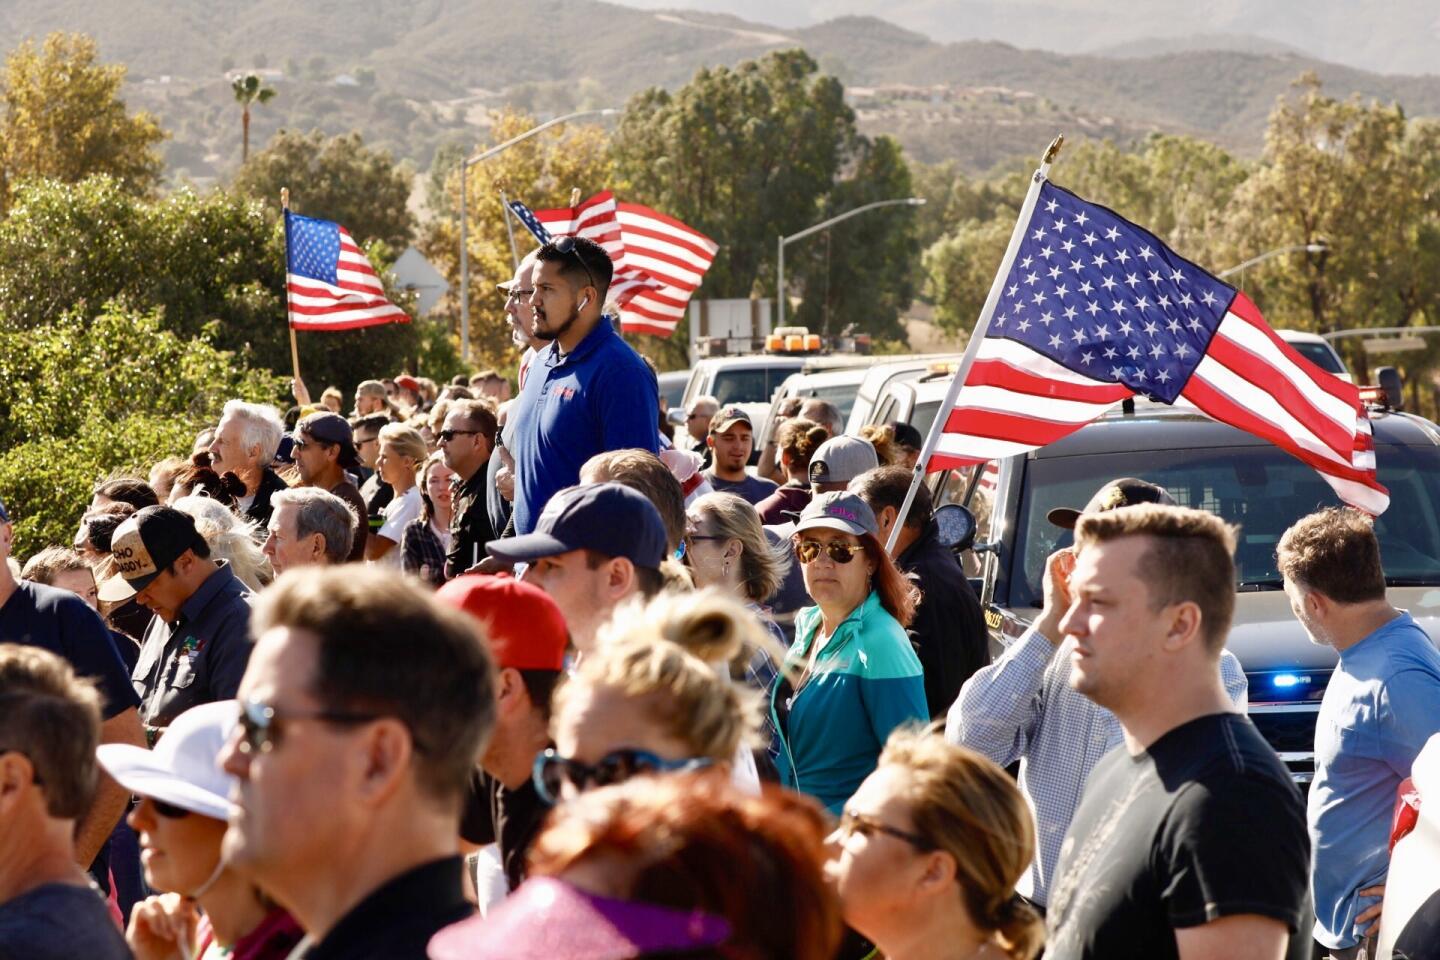 Crowds watch the procession carrying the flag-draped casket of Sgt. Ron Helus to the medical examiner's office in Ventura.